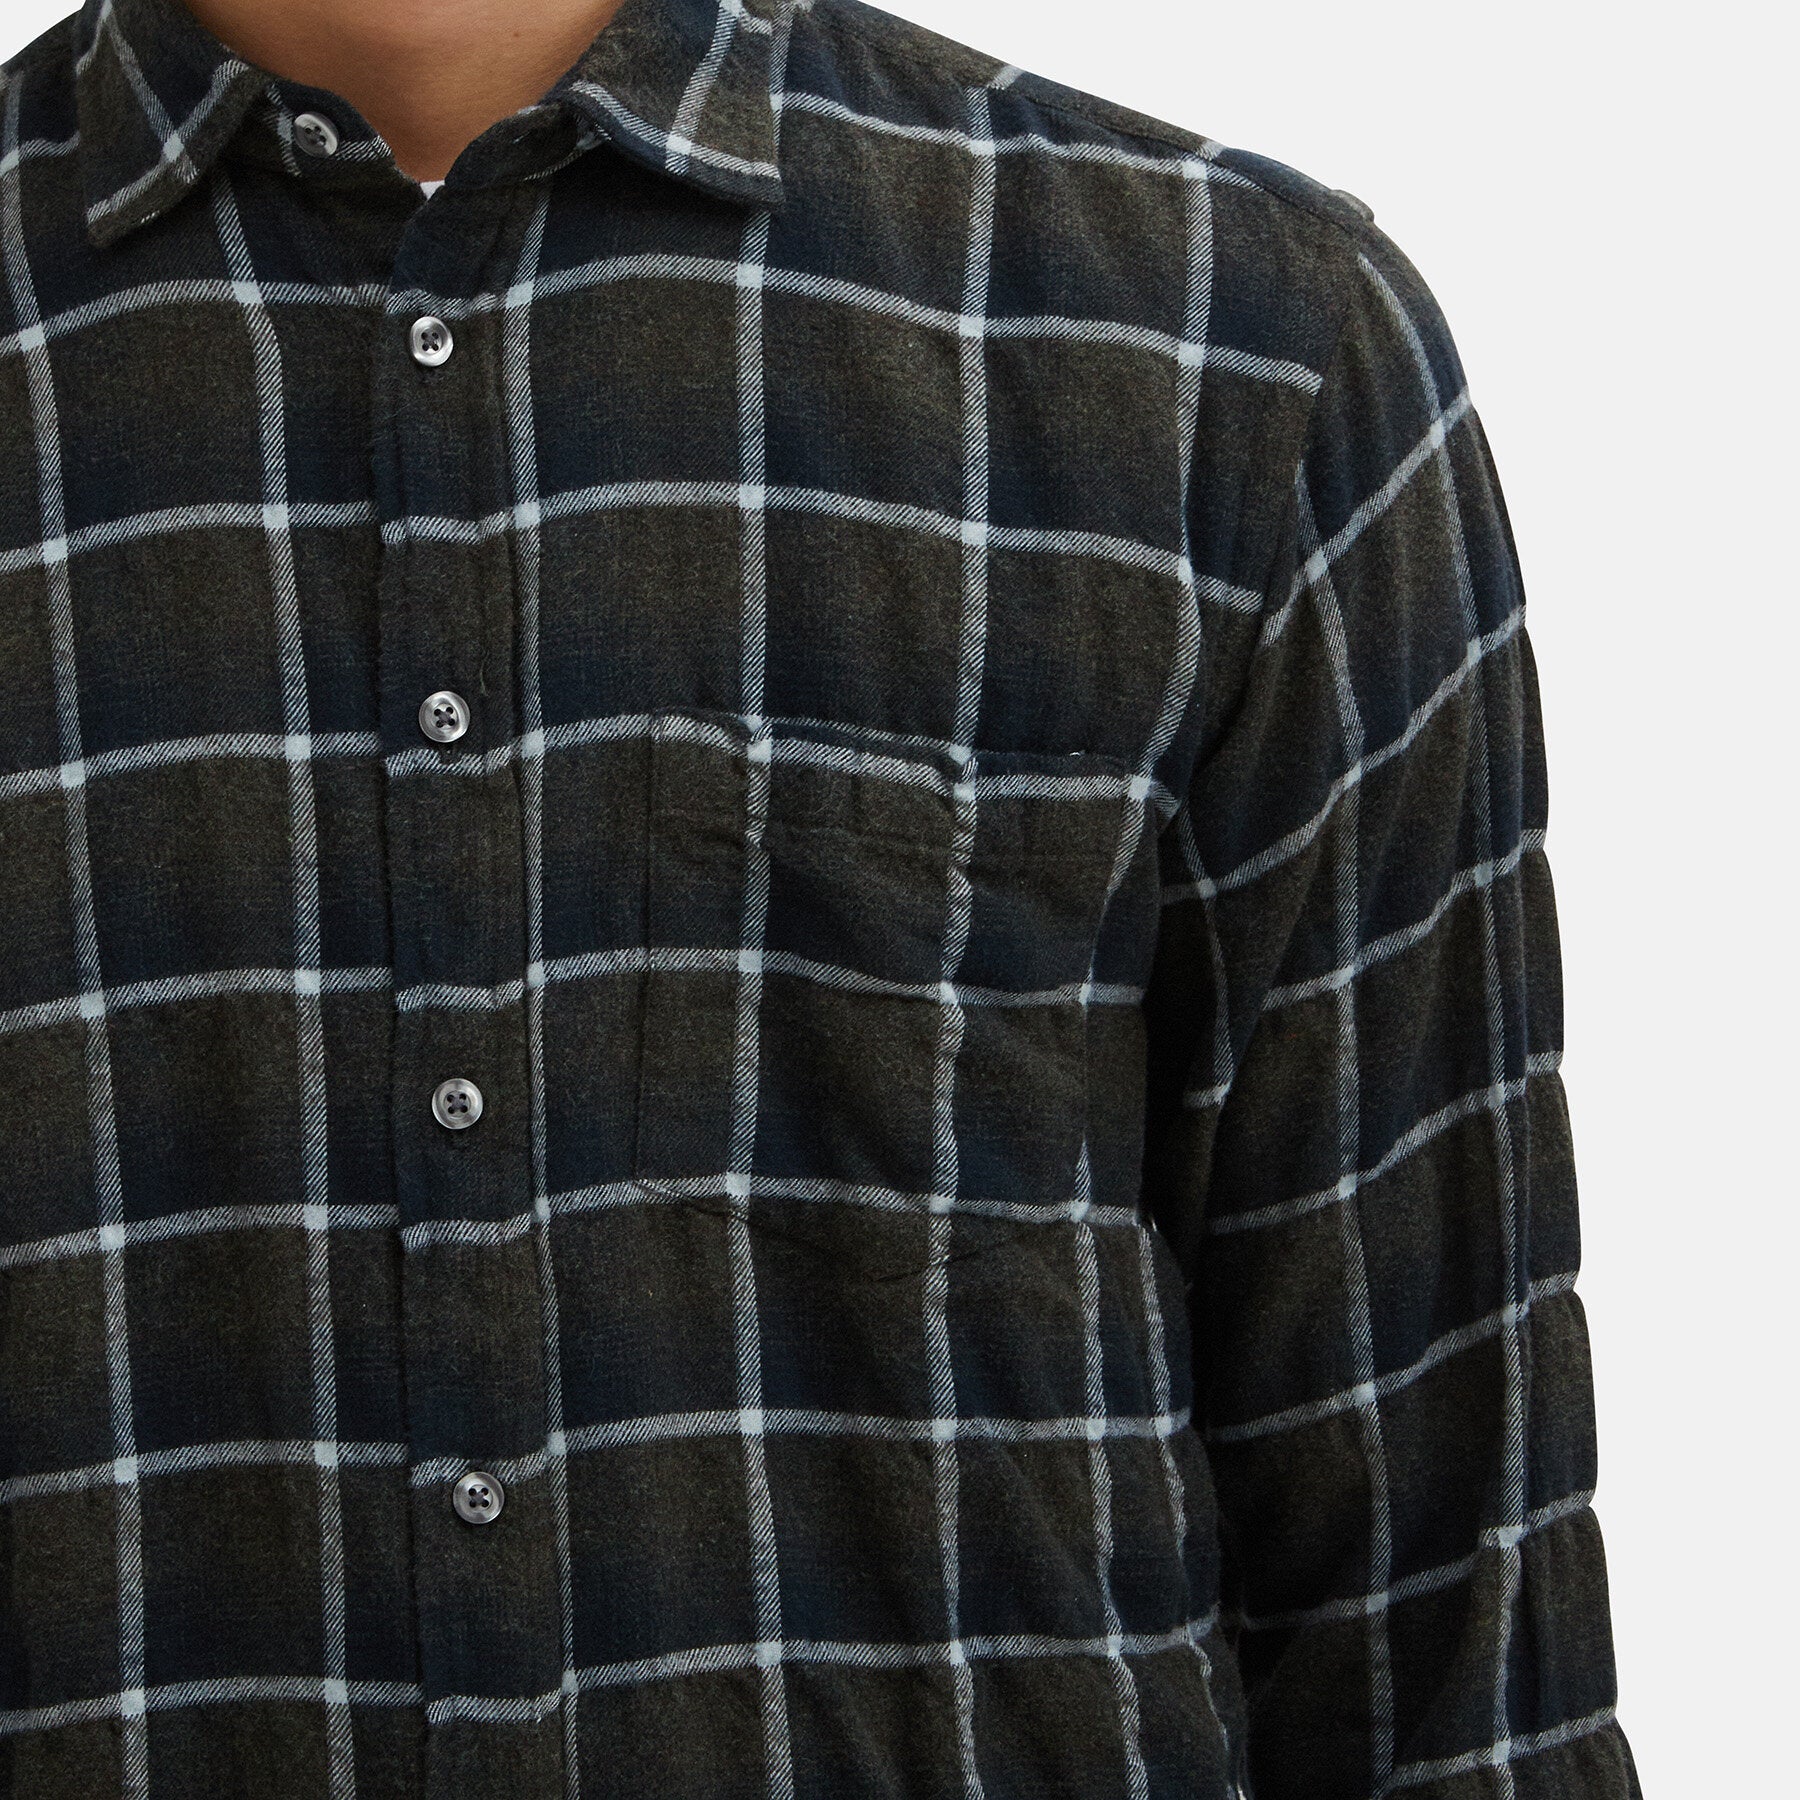 Shirt with madras pattern